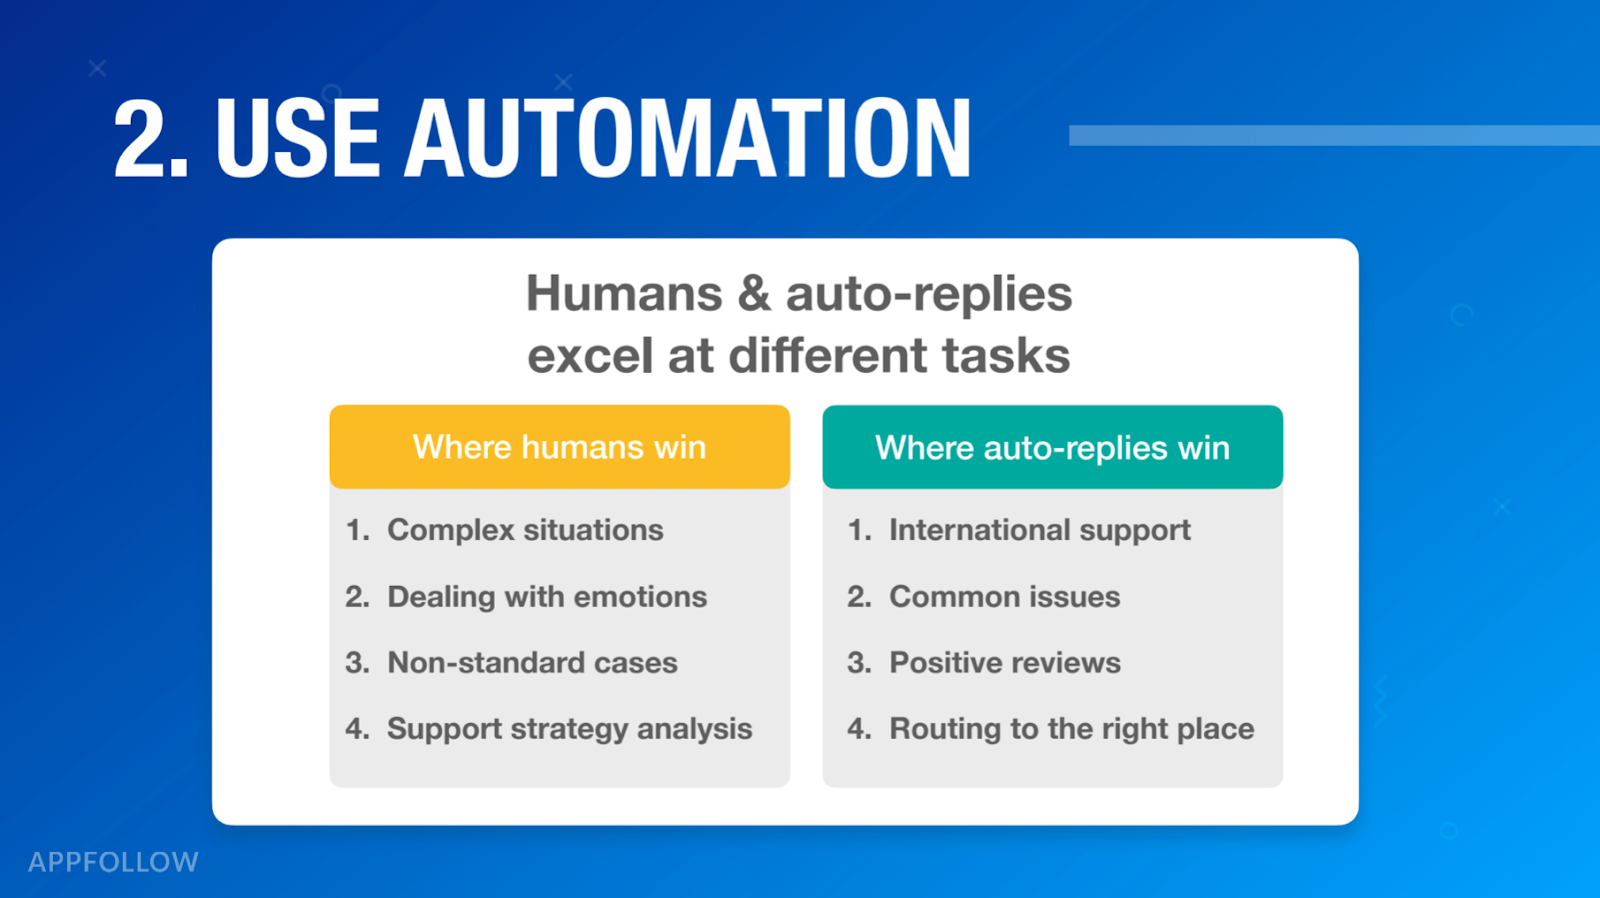 Using automation for customer service